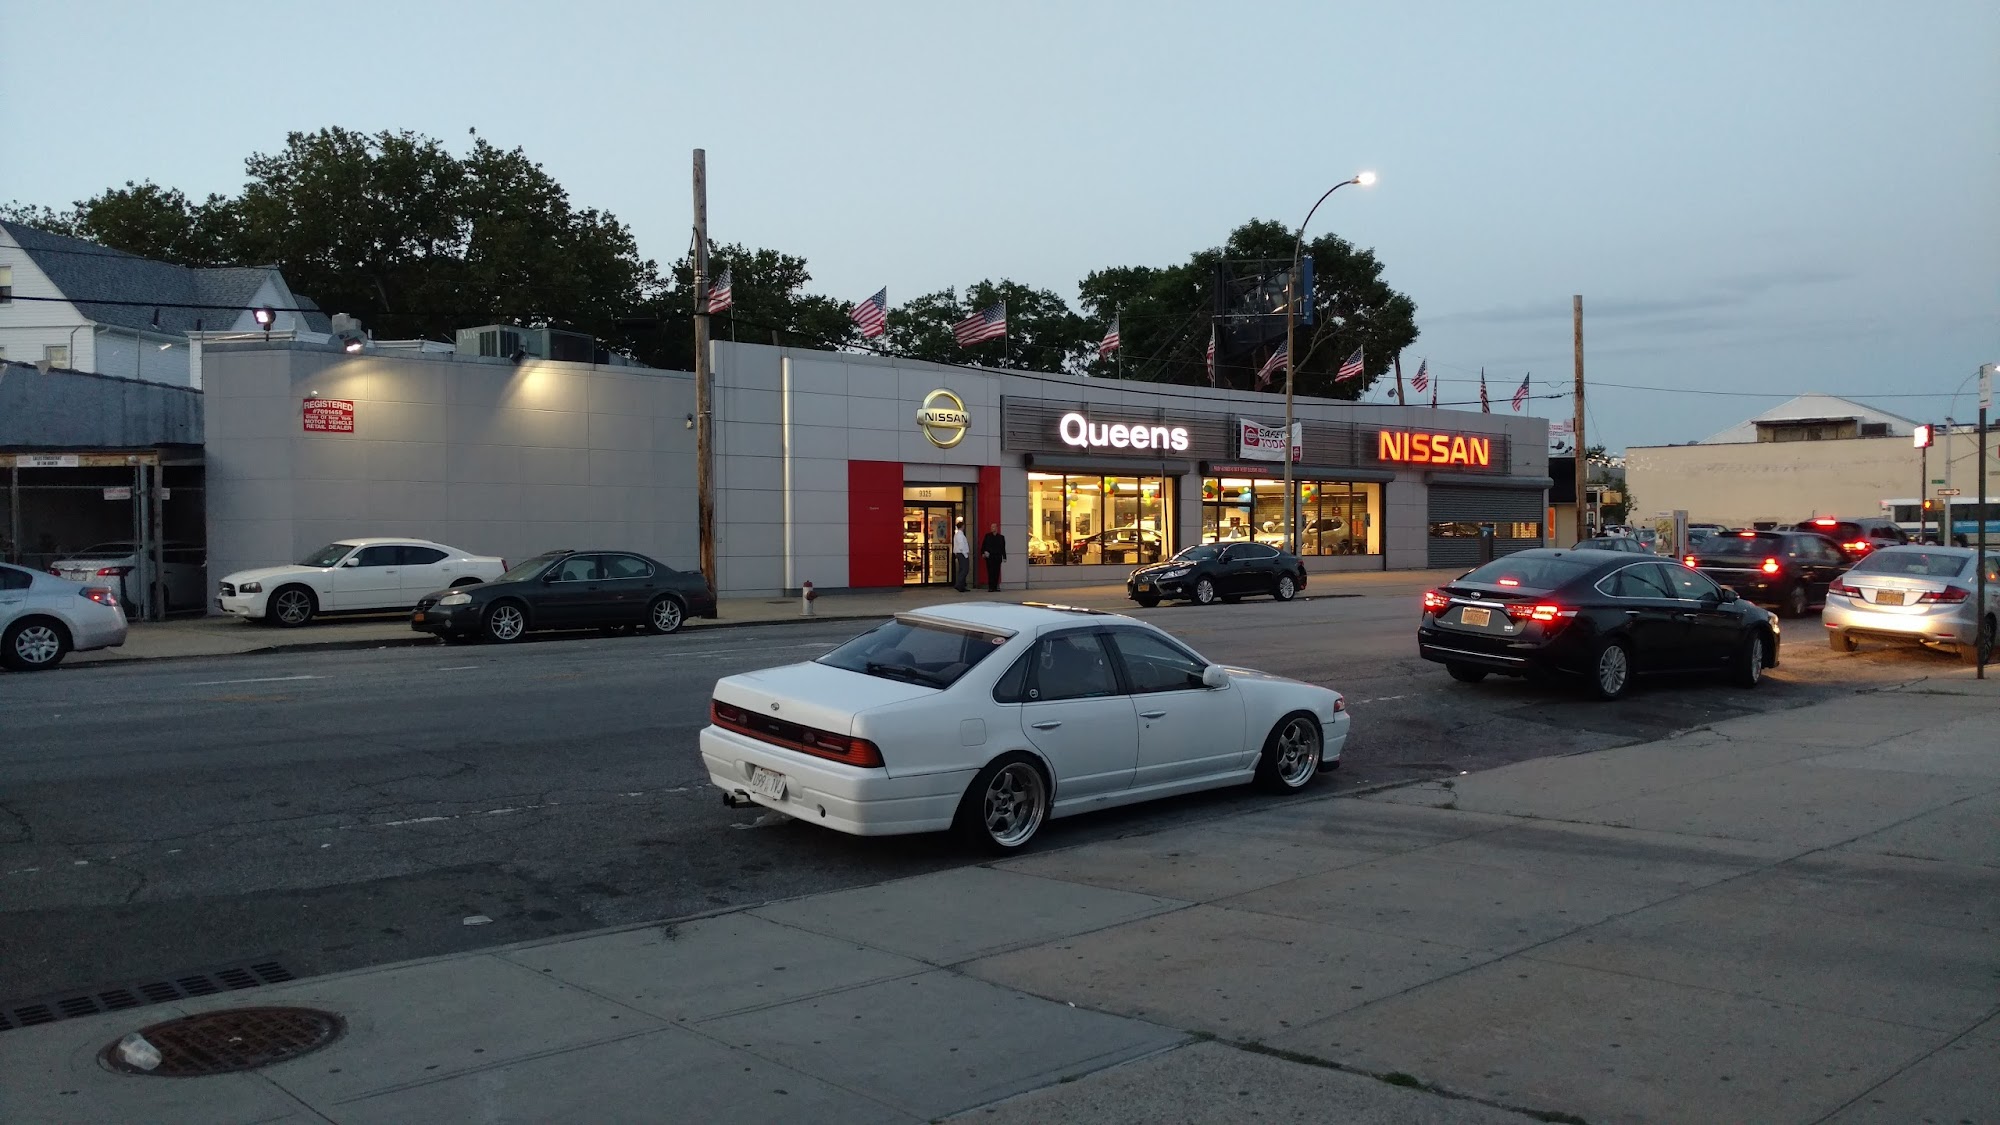 NISSAN OF QUEENS USED CARS